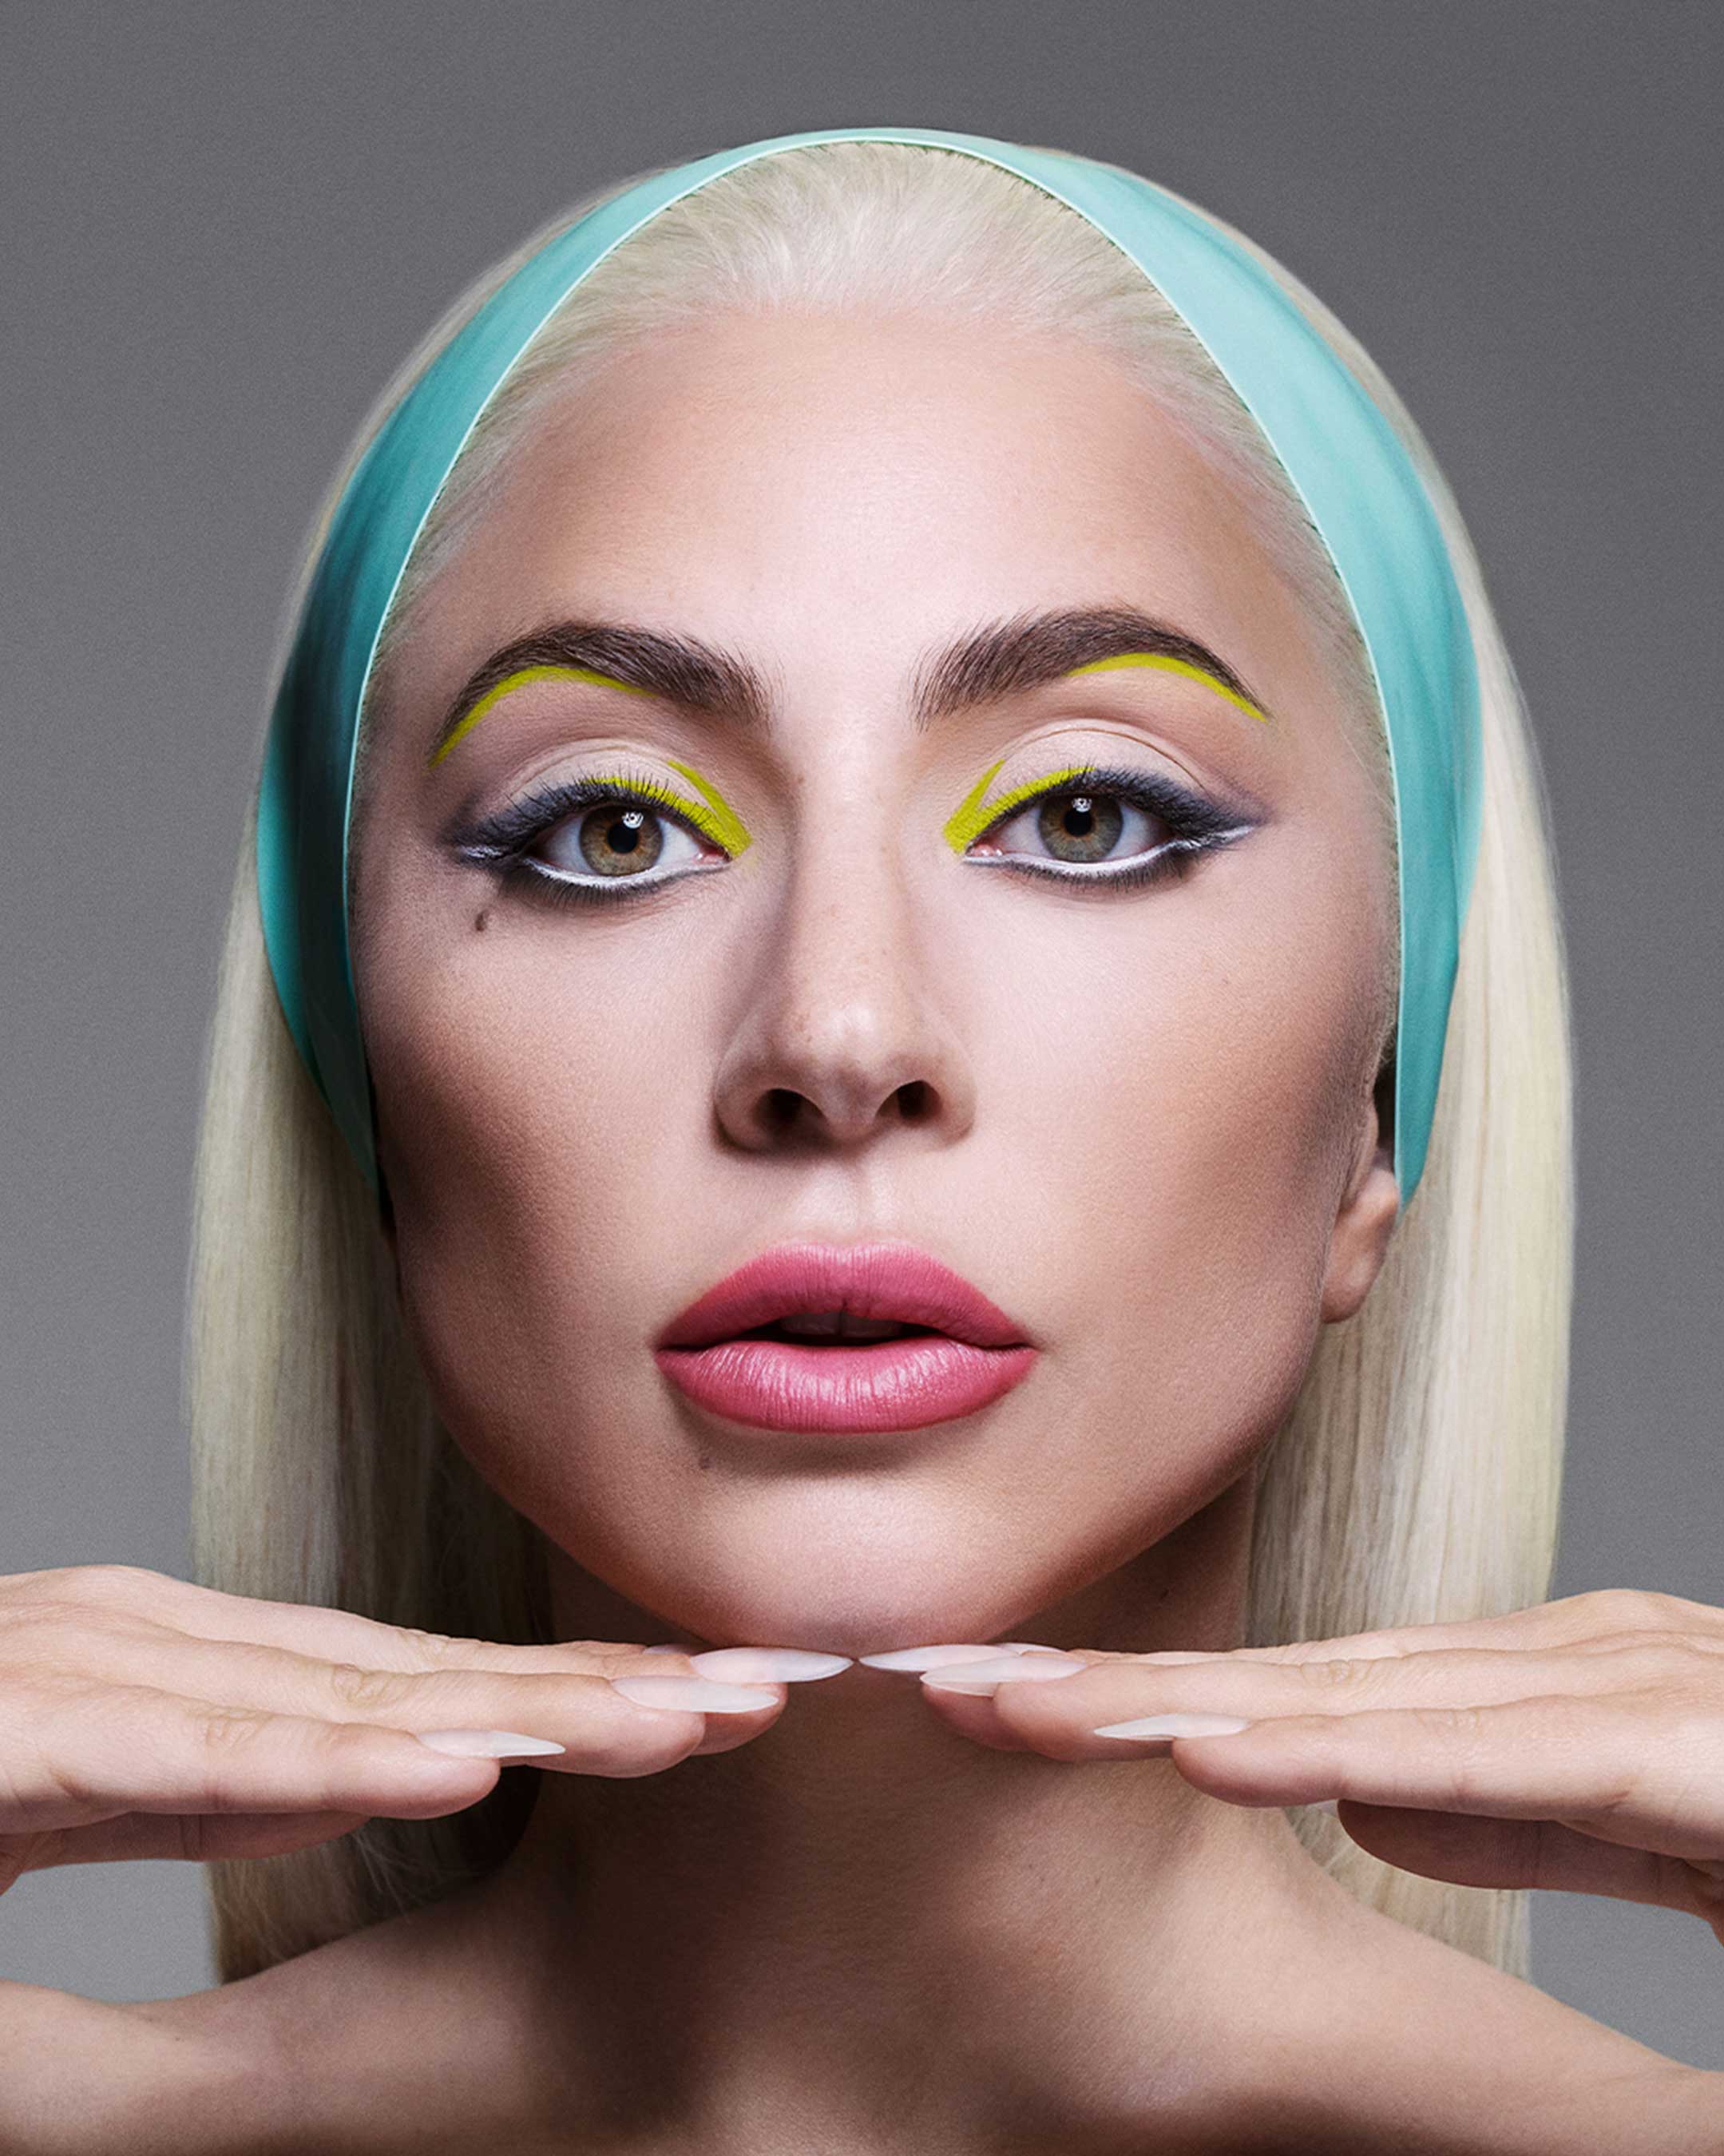 HAUS LABS BY LADY GAGA Founder Lady Gaga shot by Inez and Vinoodh, wearing Optic Intensity Eco Gel Eyeliners in Chartreuse Matte, Charcoal Matte and White Onyx Matte, and Le Monster Lip Crayon in Melon Matte. Shot By: Inez and Vinoodh